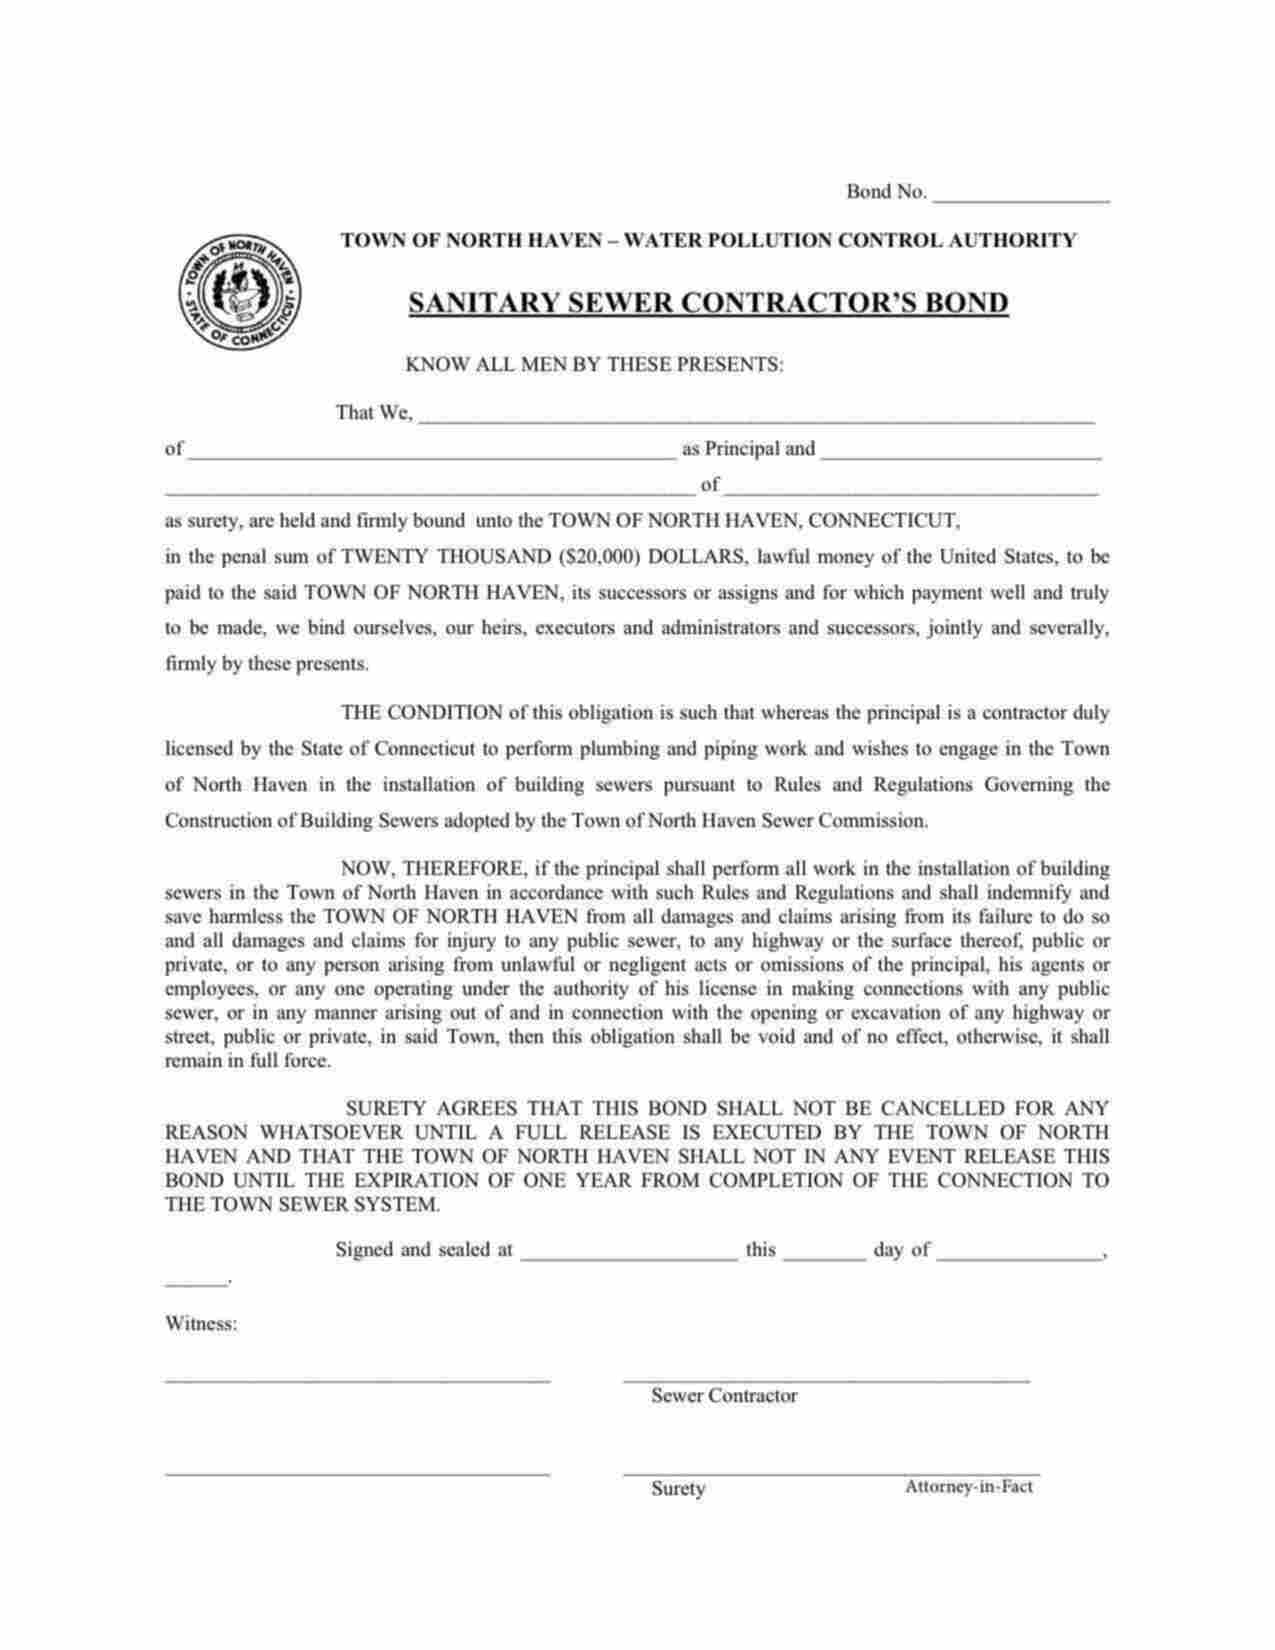 Connecticut Sanitary Sewer Contractor Bond Form